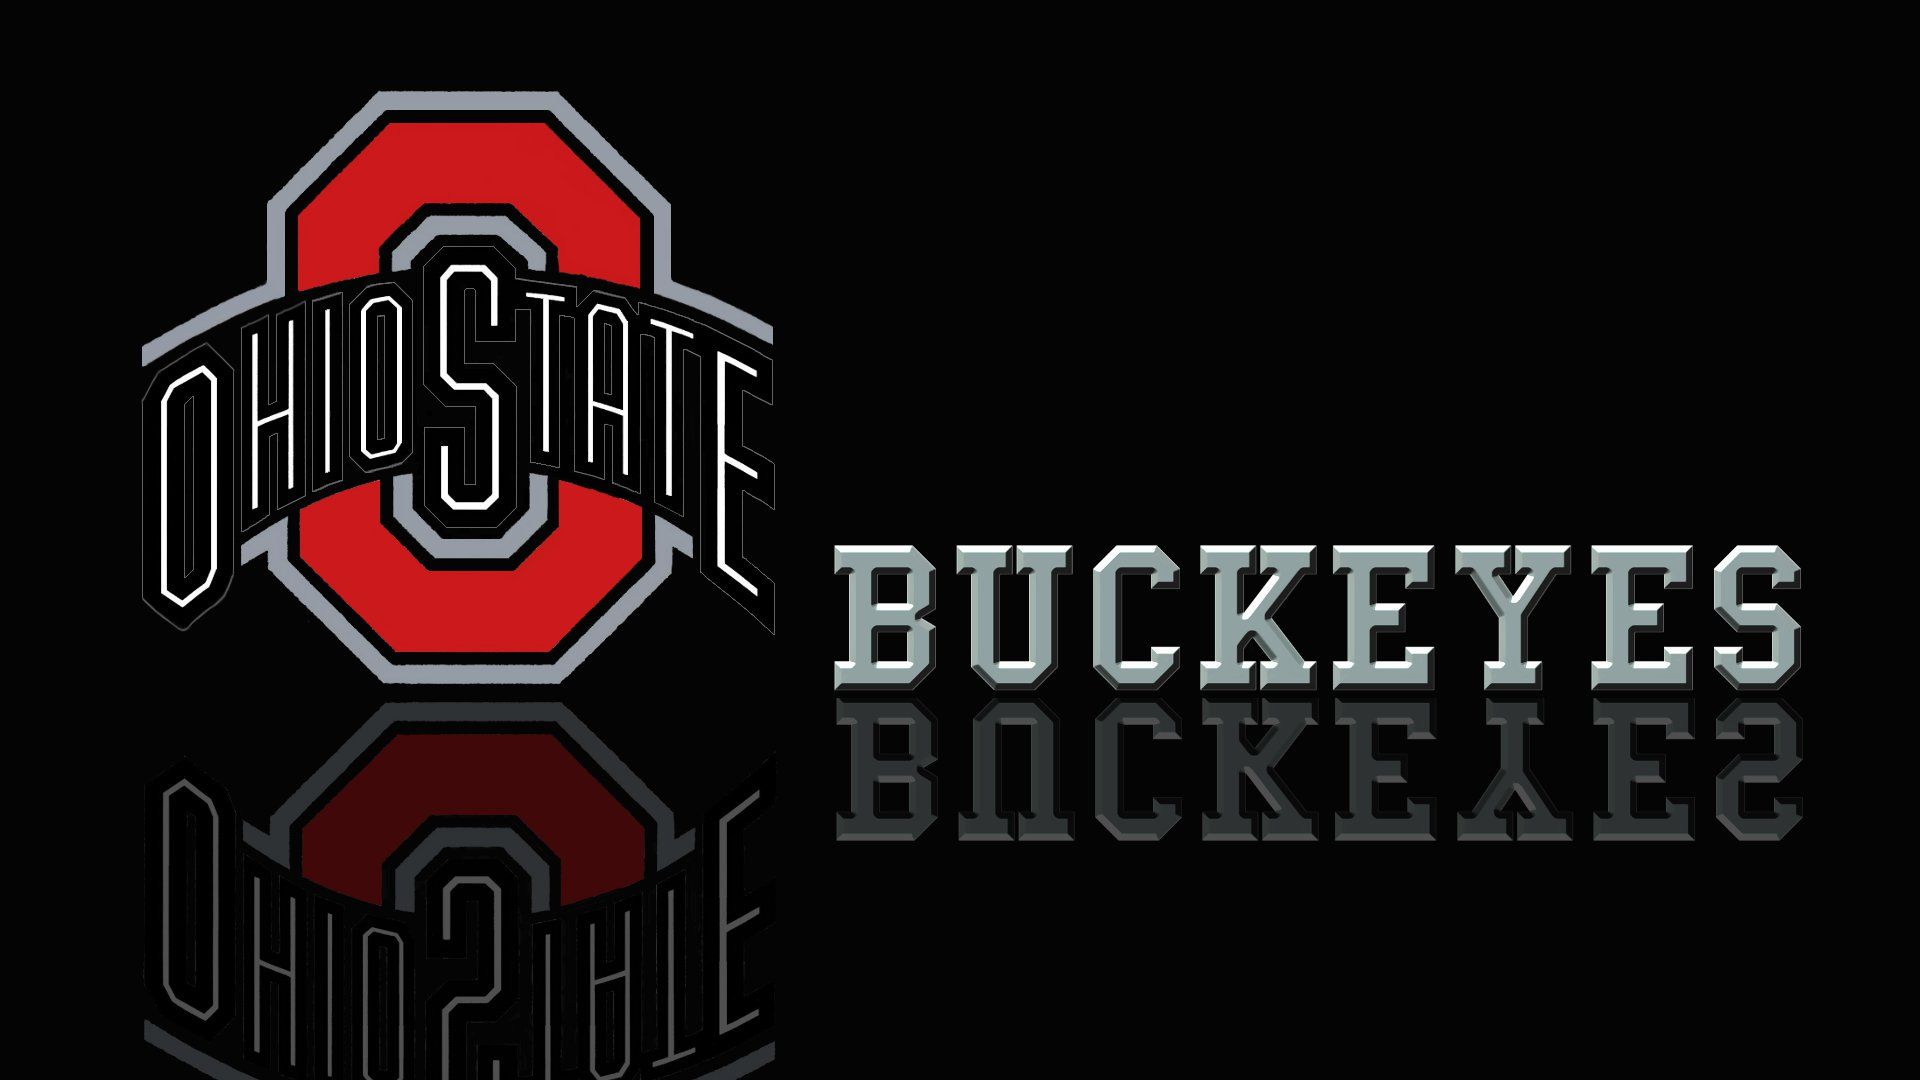 Ohio State Logo Wallpapers | Wallpapers, Backgrounds, Images, Art ...